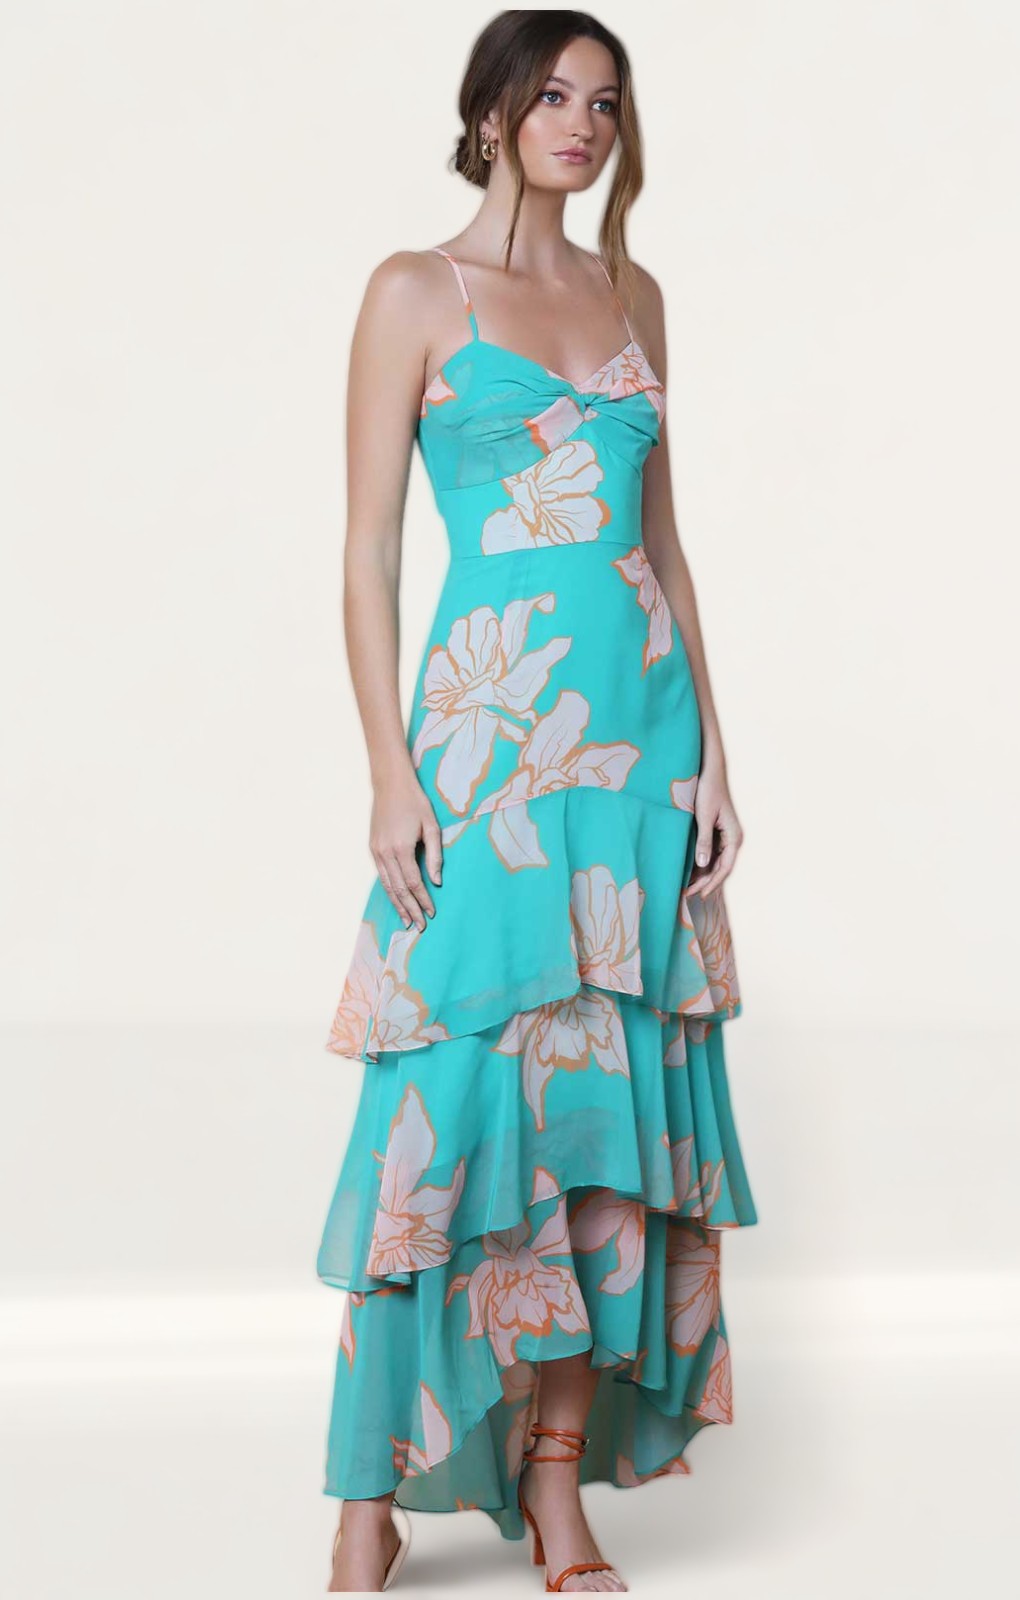 Hutch Milo Dress in Teal Tropical Flower product image